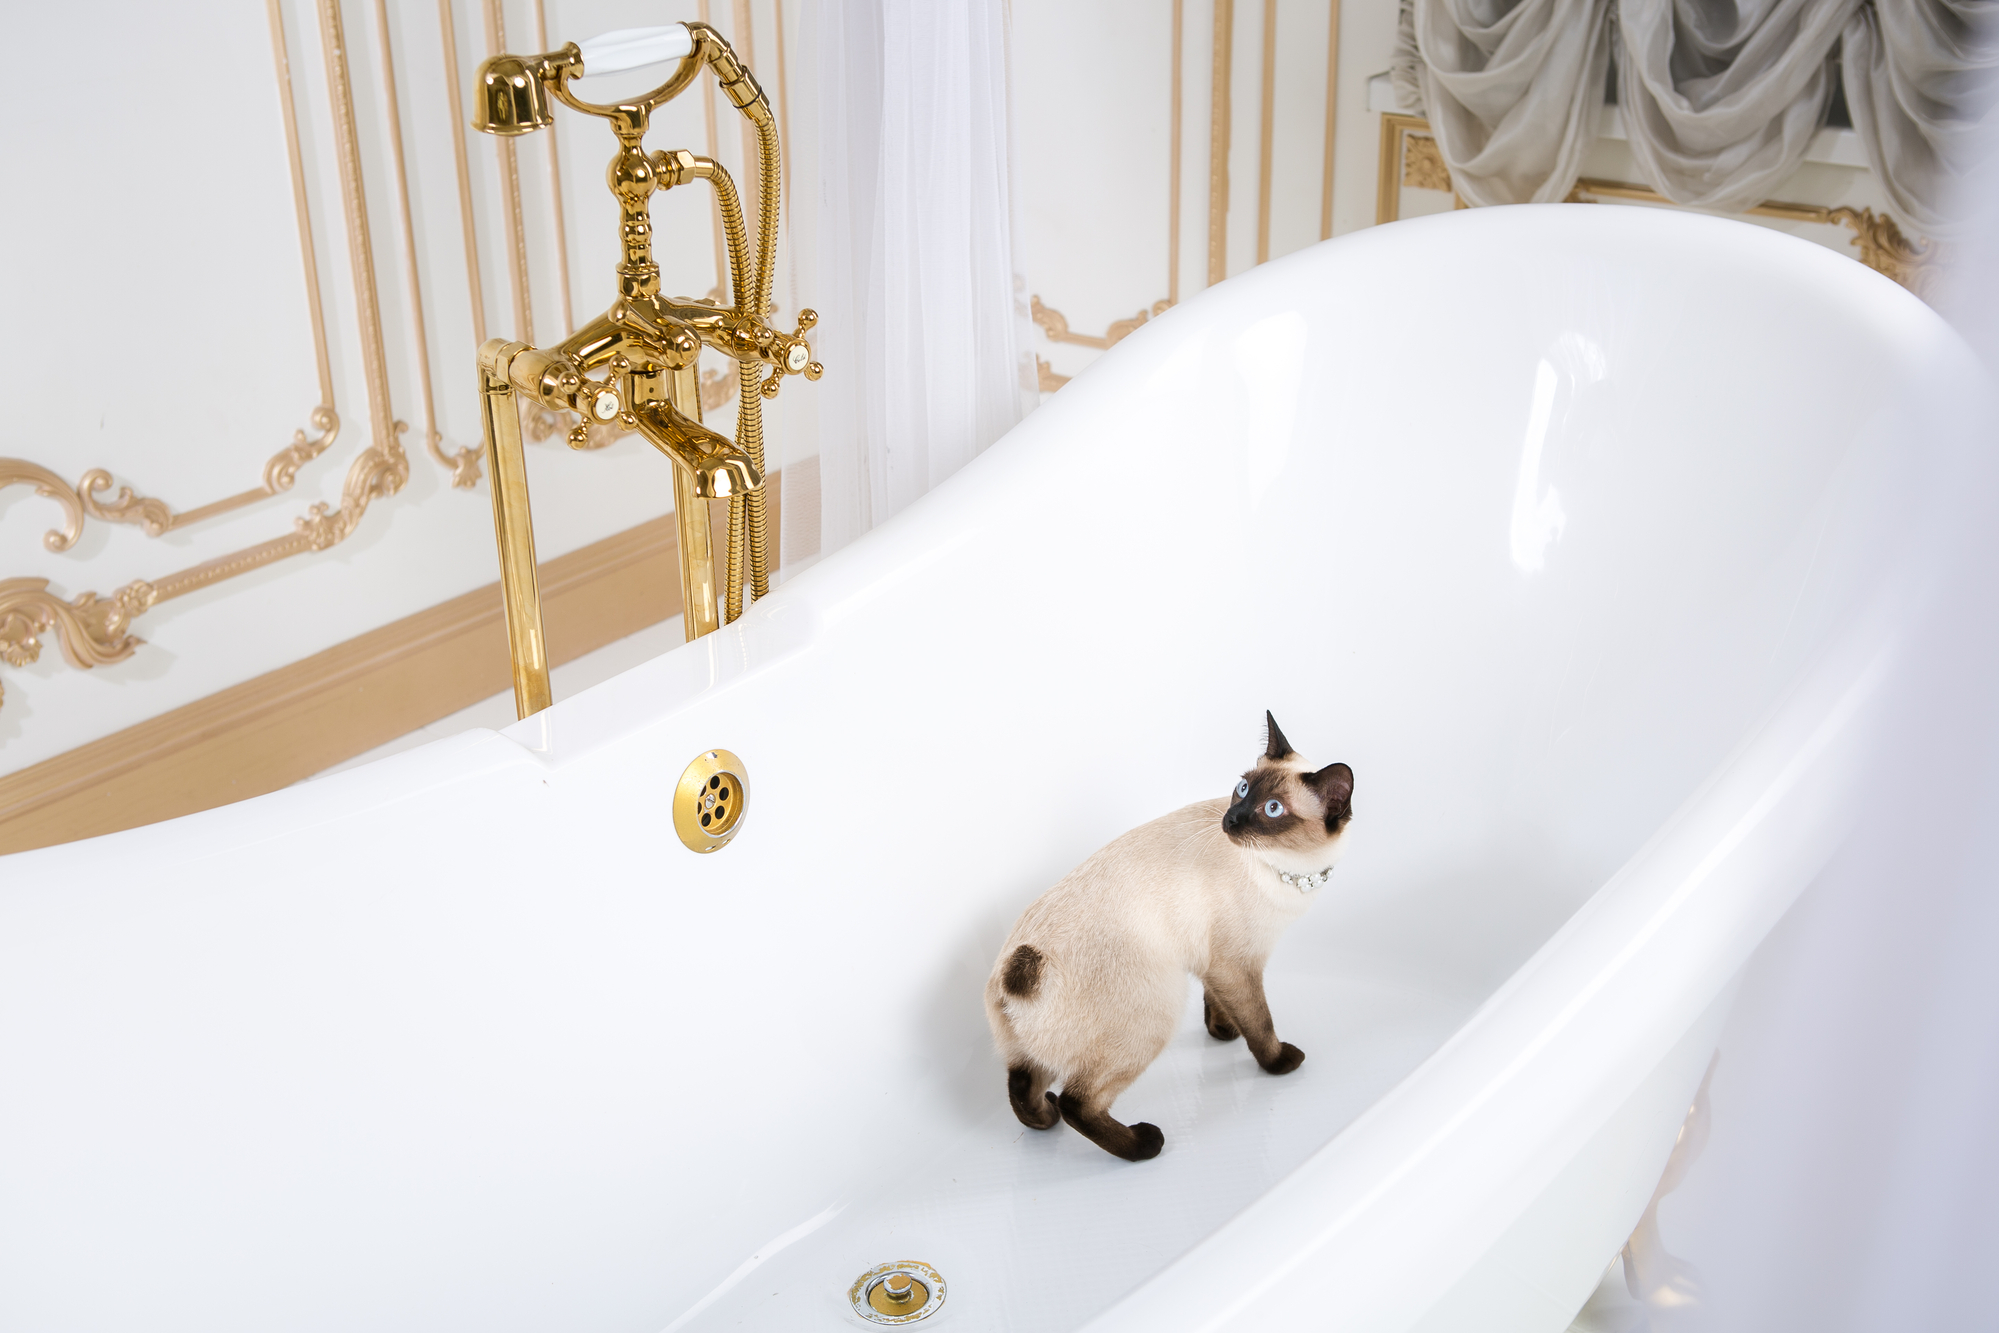 Why Does my Cat Poop in the Bathtub